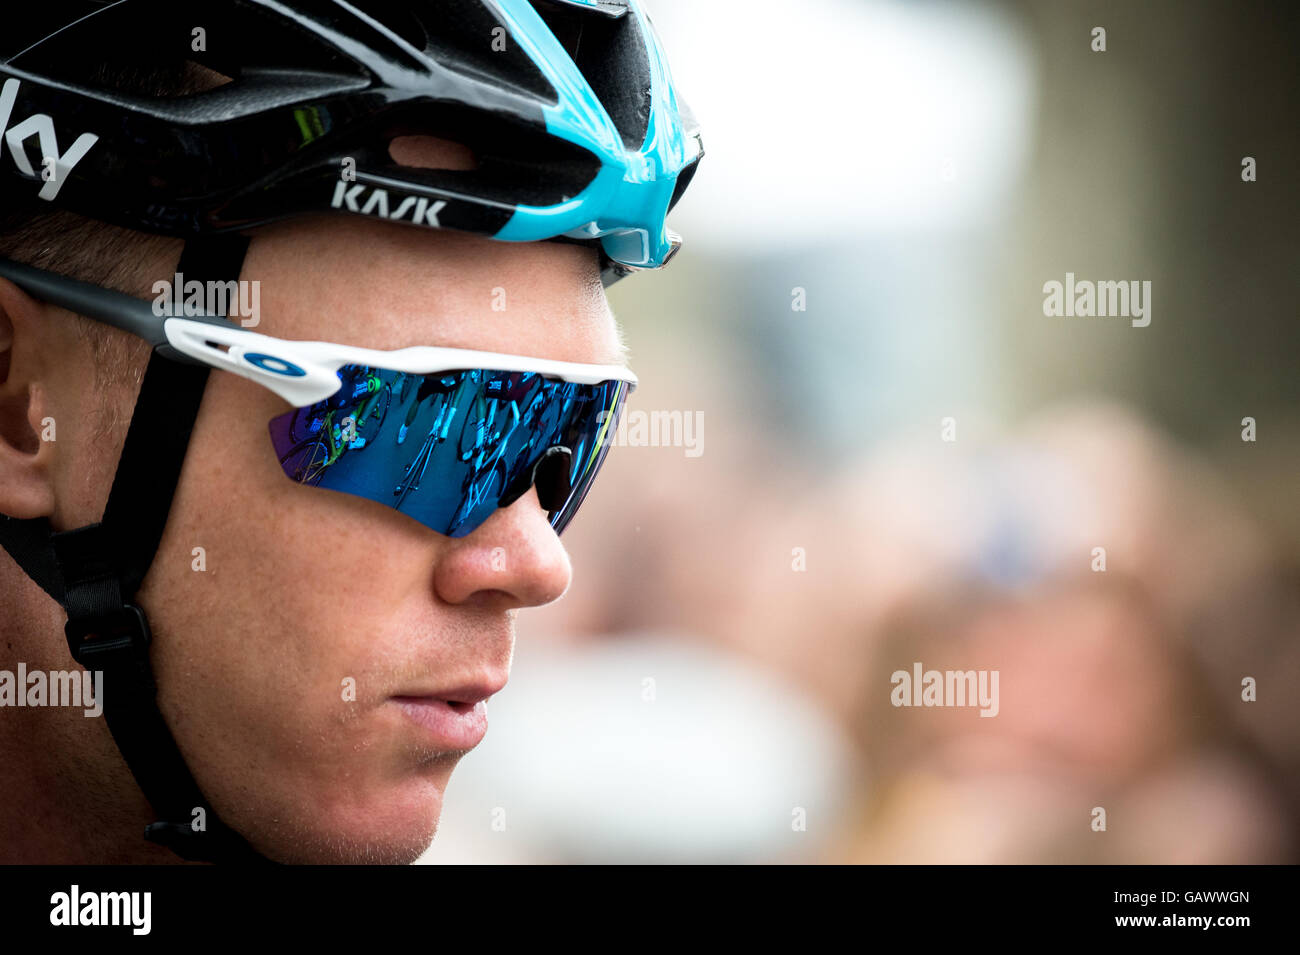 Limoges, France. 5th July, 2016. Tour de France stage 4 from Saumur to Limoges. Chris Froome focused at the start of the stage. Stock Photo